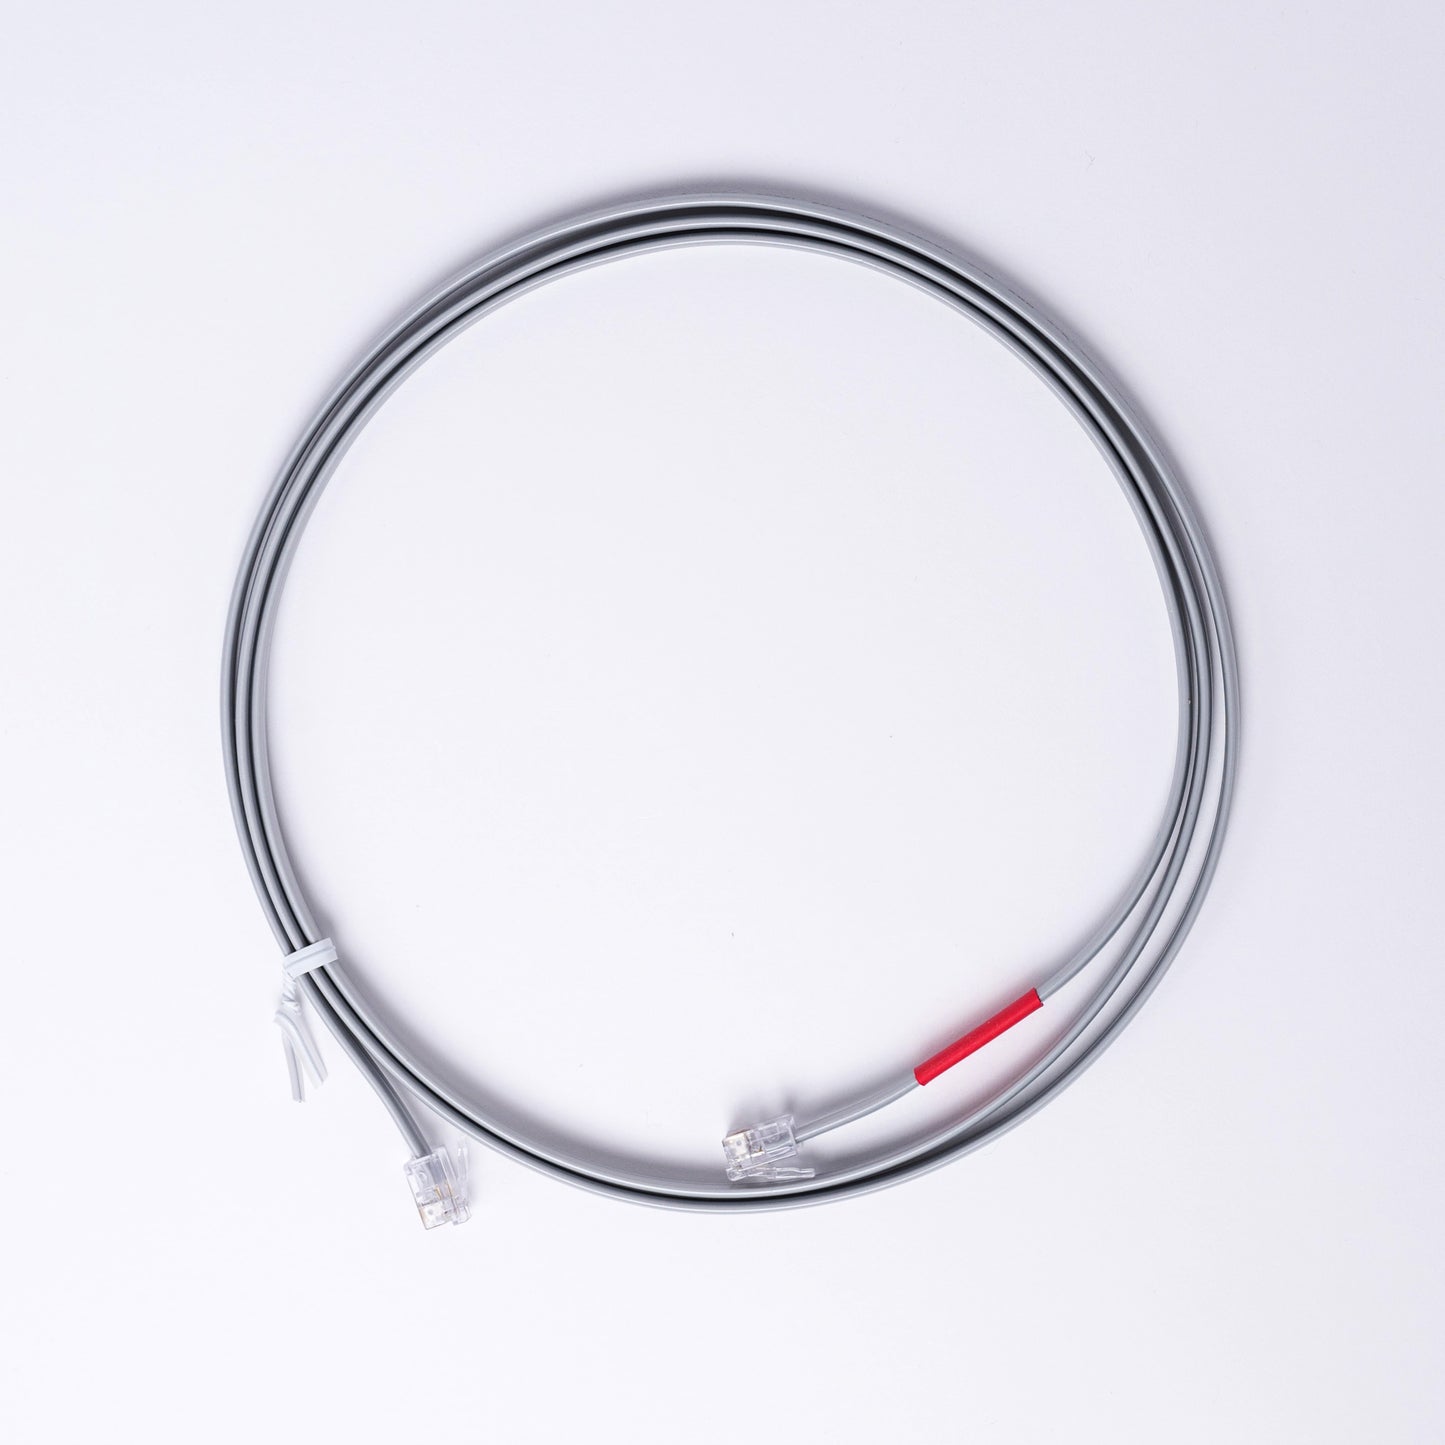 Theracycle data cables 6 pin